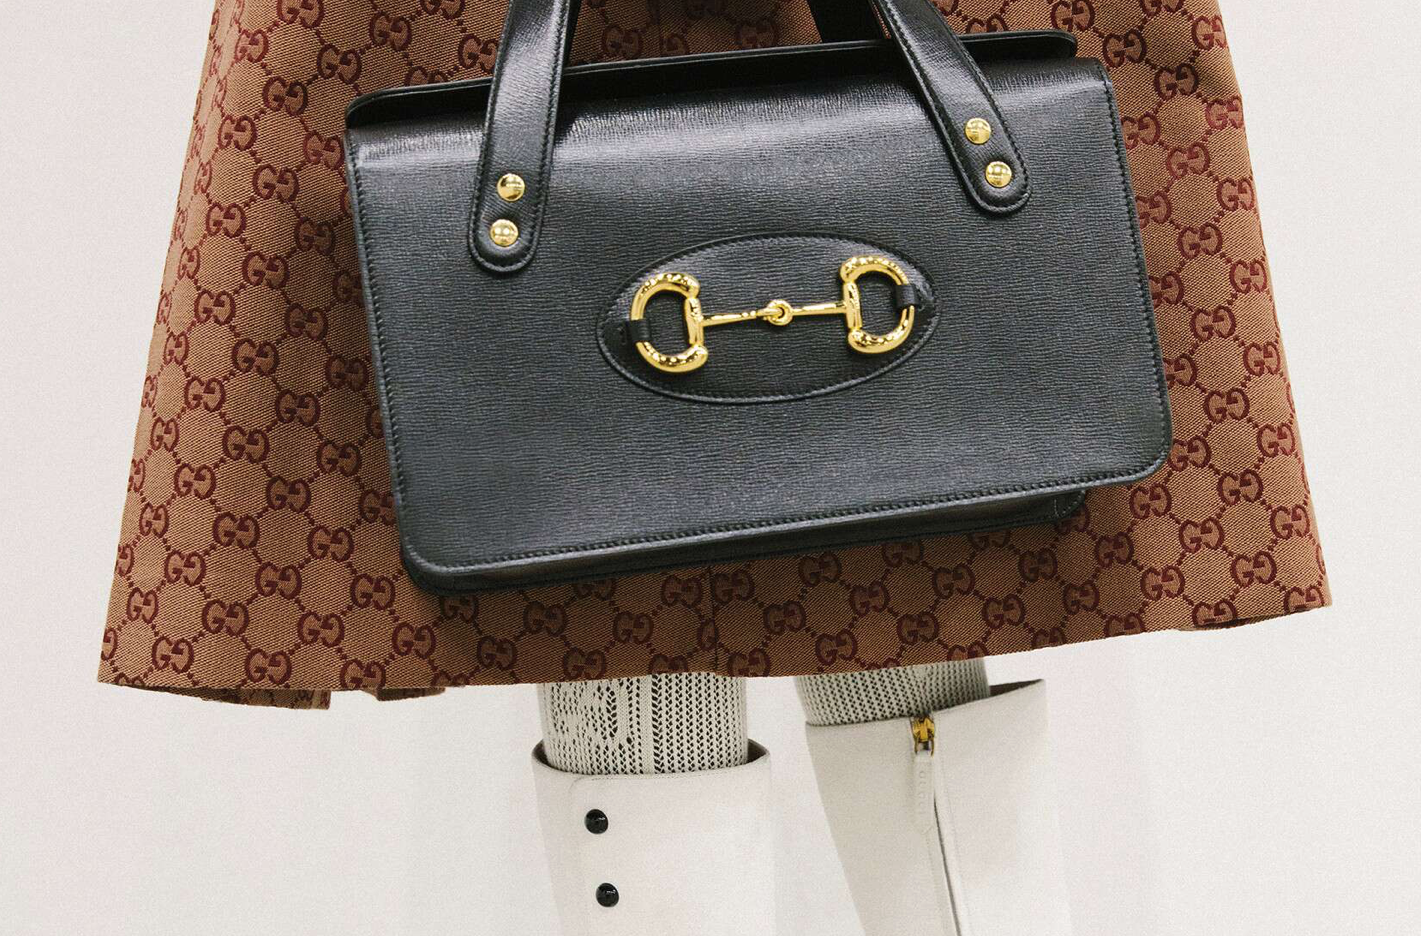 Which one is more expensive between Gucci and Louis Vuitton? - Quora